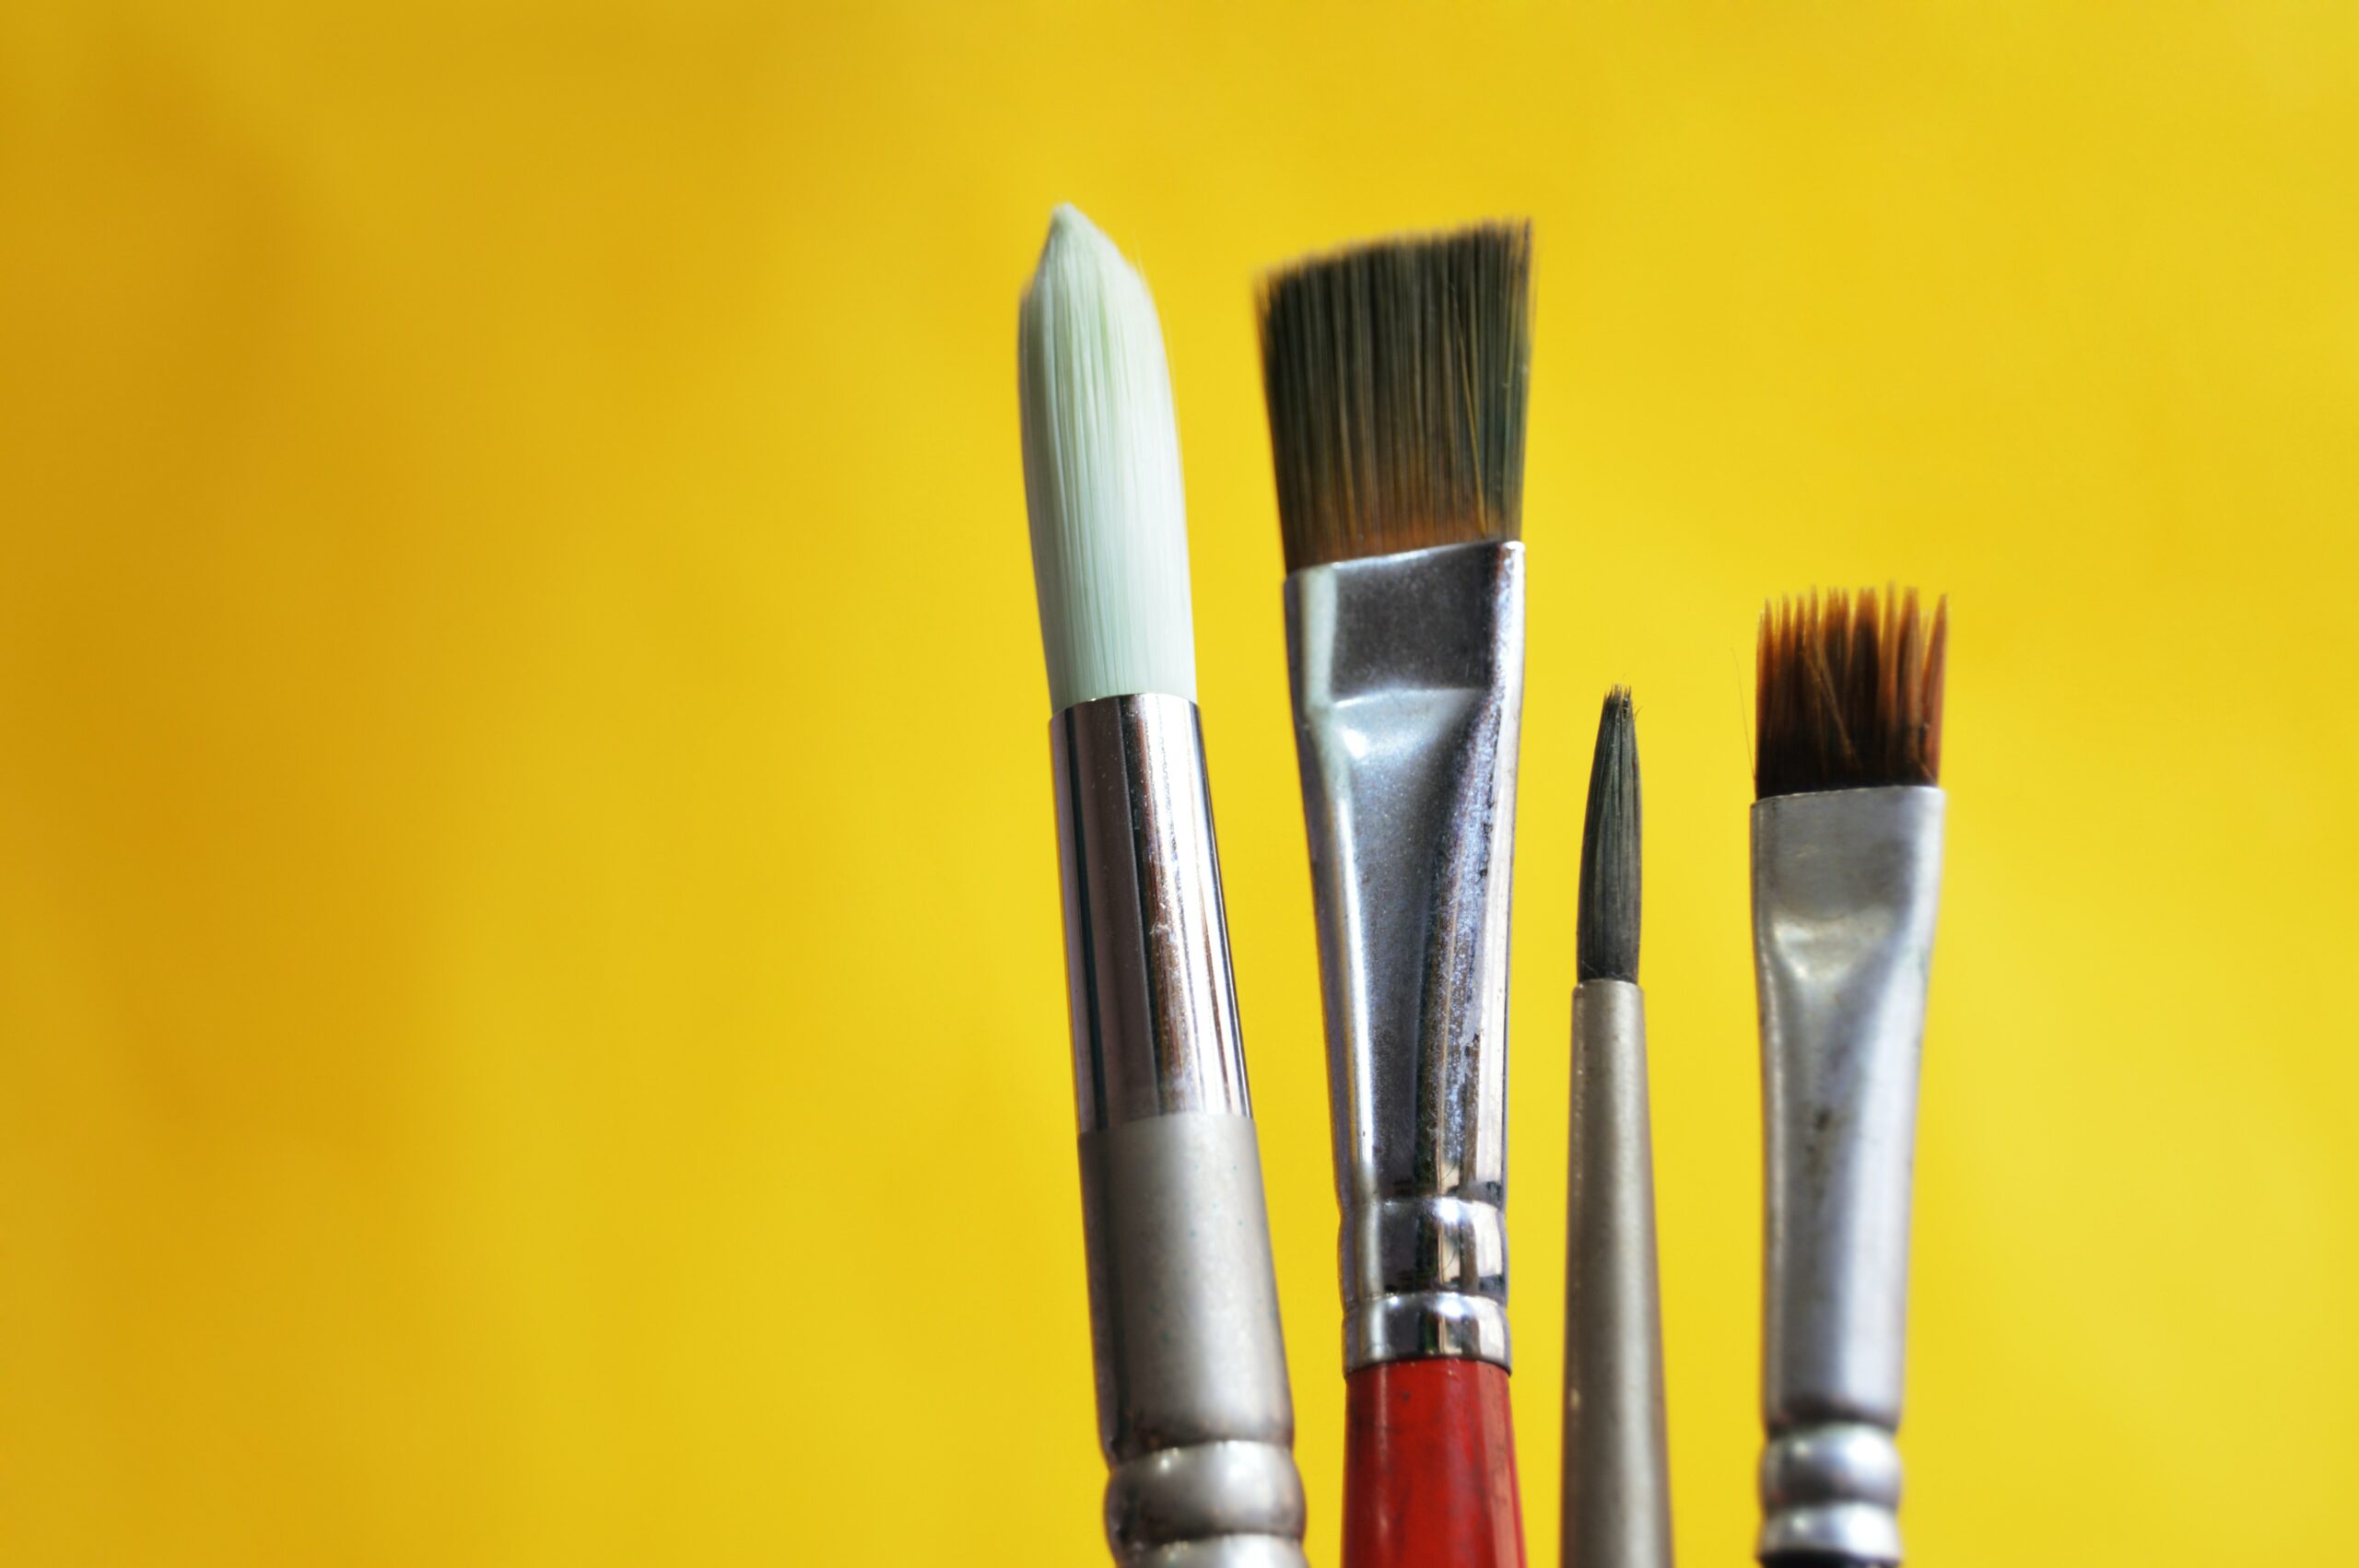 Overview Of Acrylic Paint Brushes